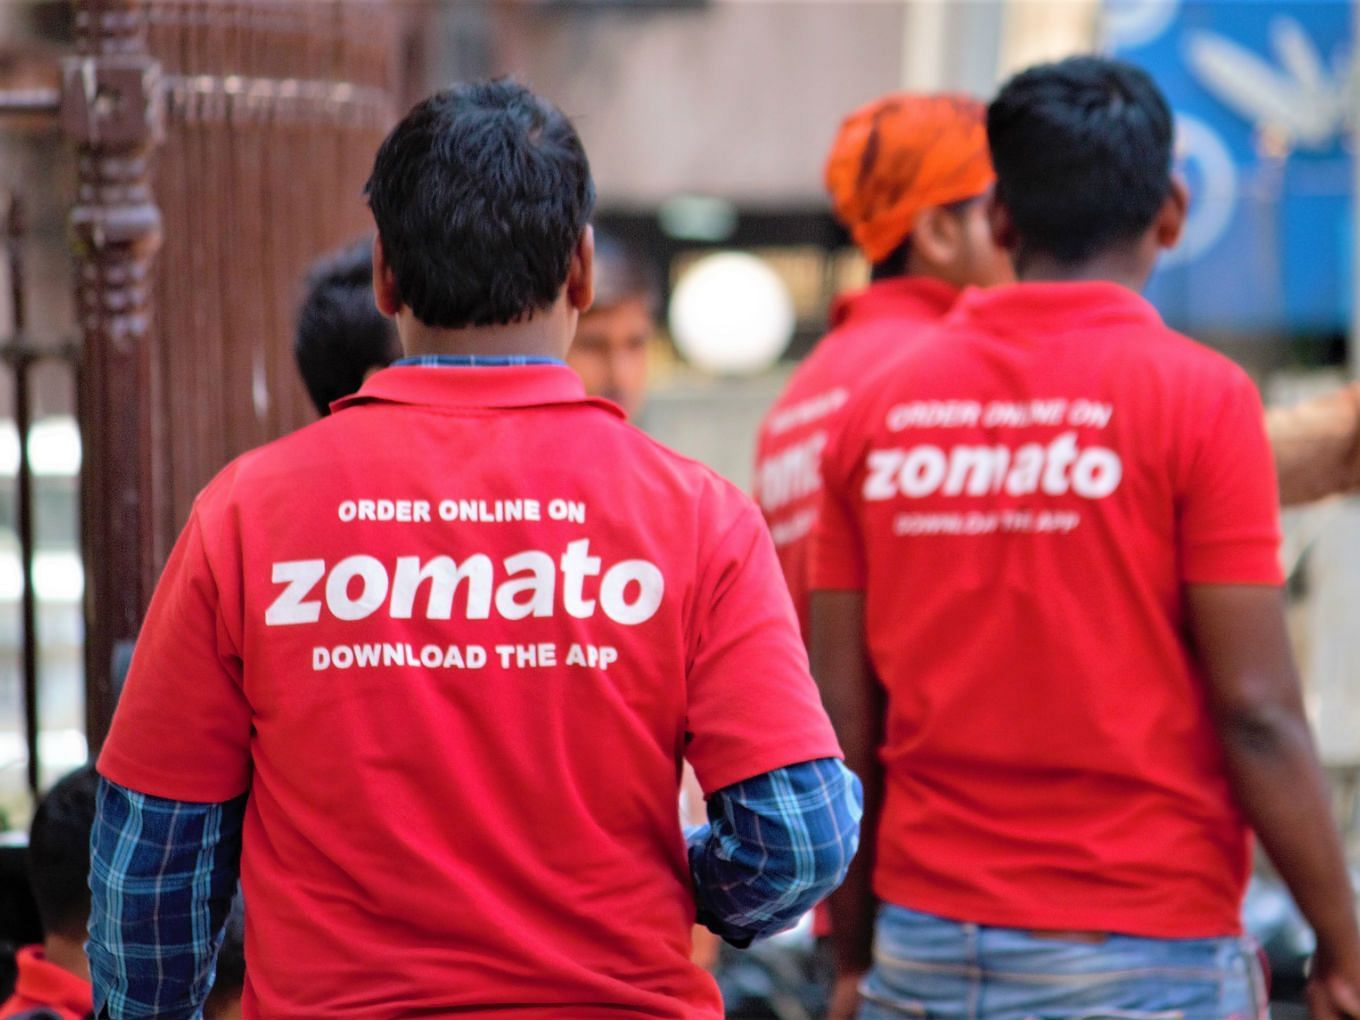 zomato user duped 1 lakh rupees by online fraud